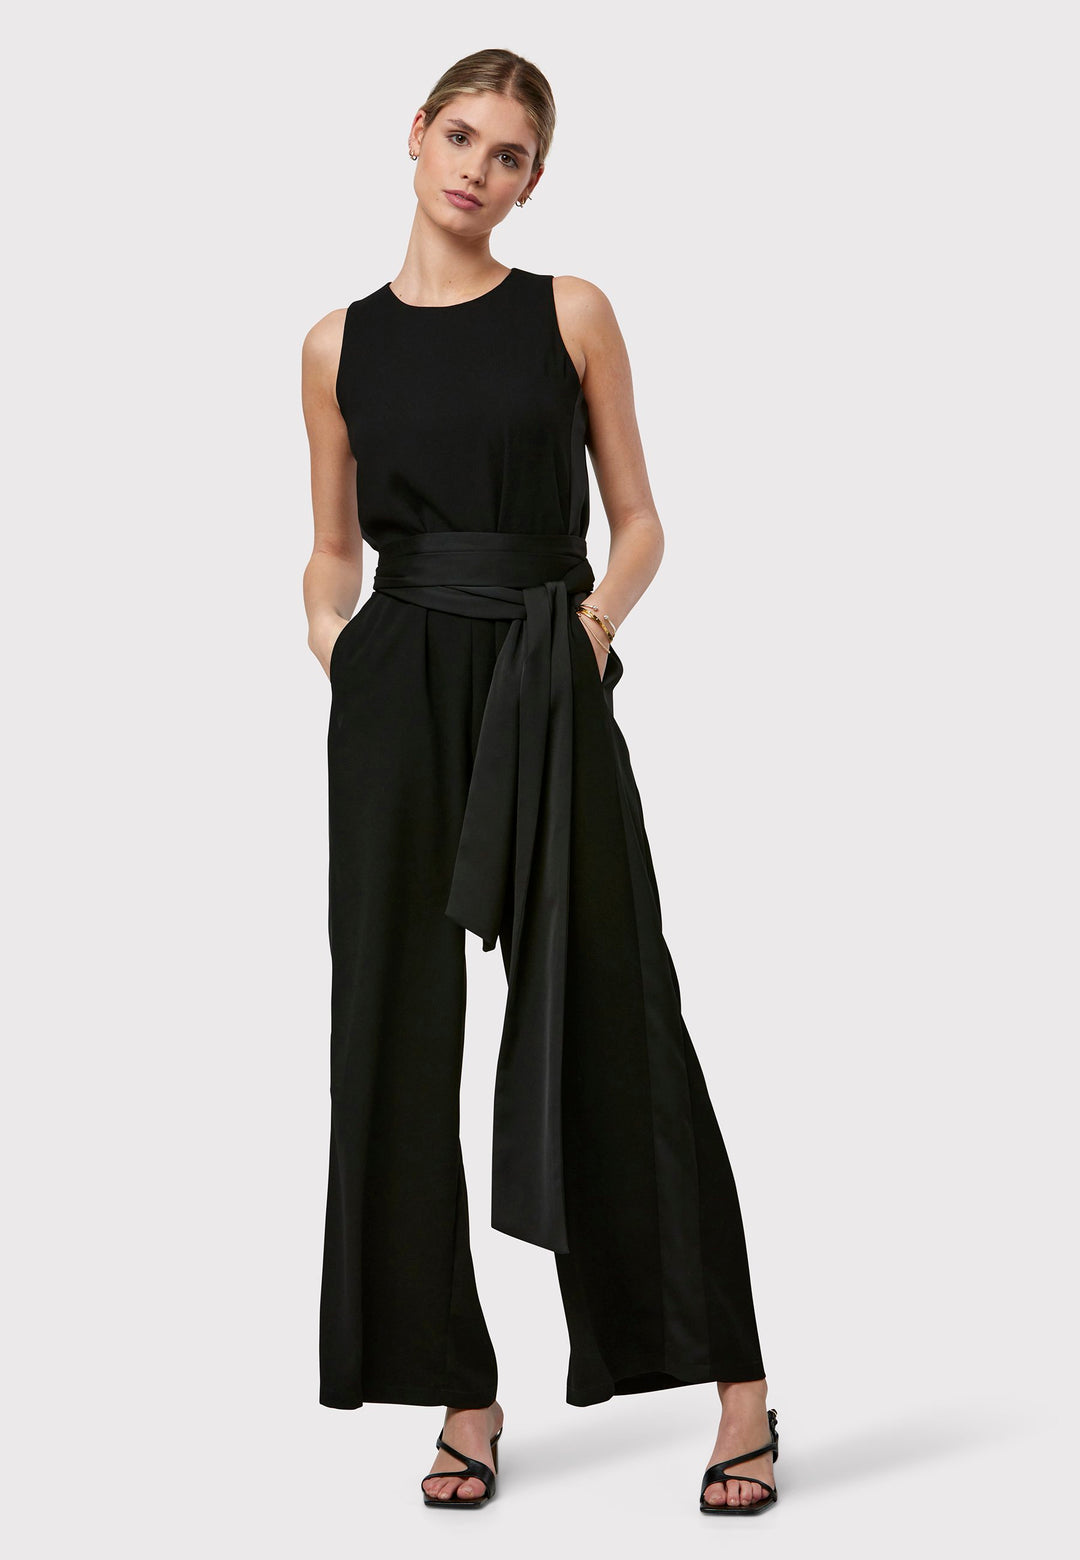 Marie-Claire, a sleeveless black jumpsuit in fluid satin back crepe. Featuring a wide-leg silhouette and satin stripes on the side seams. It comes with a detachable self-fabric belt that can be used to cinch the waist or worn around the neck. Includes practical side pockets for added convenience. Perfect for relaxed yet sophisticated evening dressing.